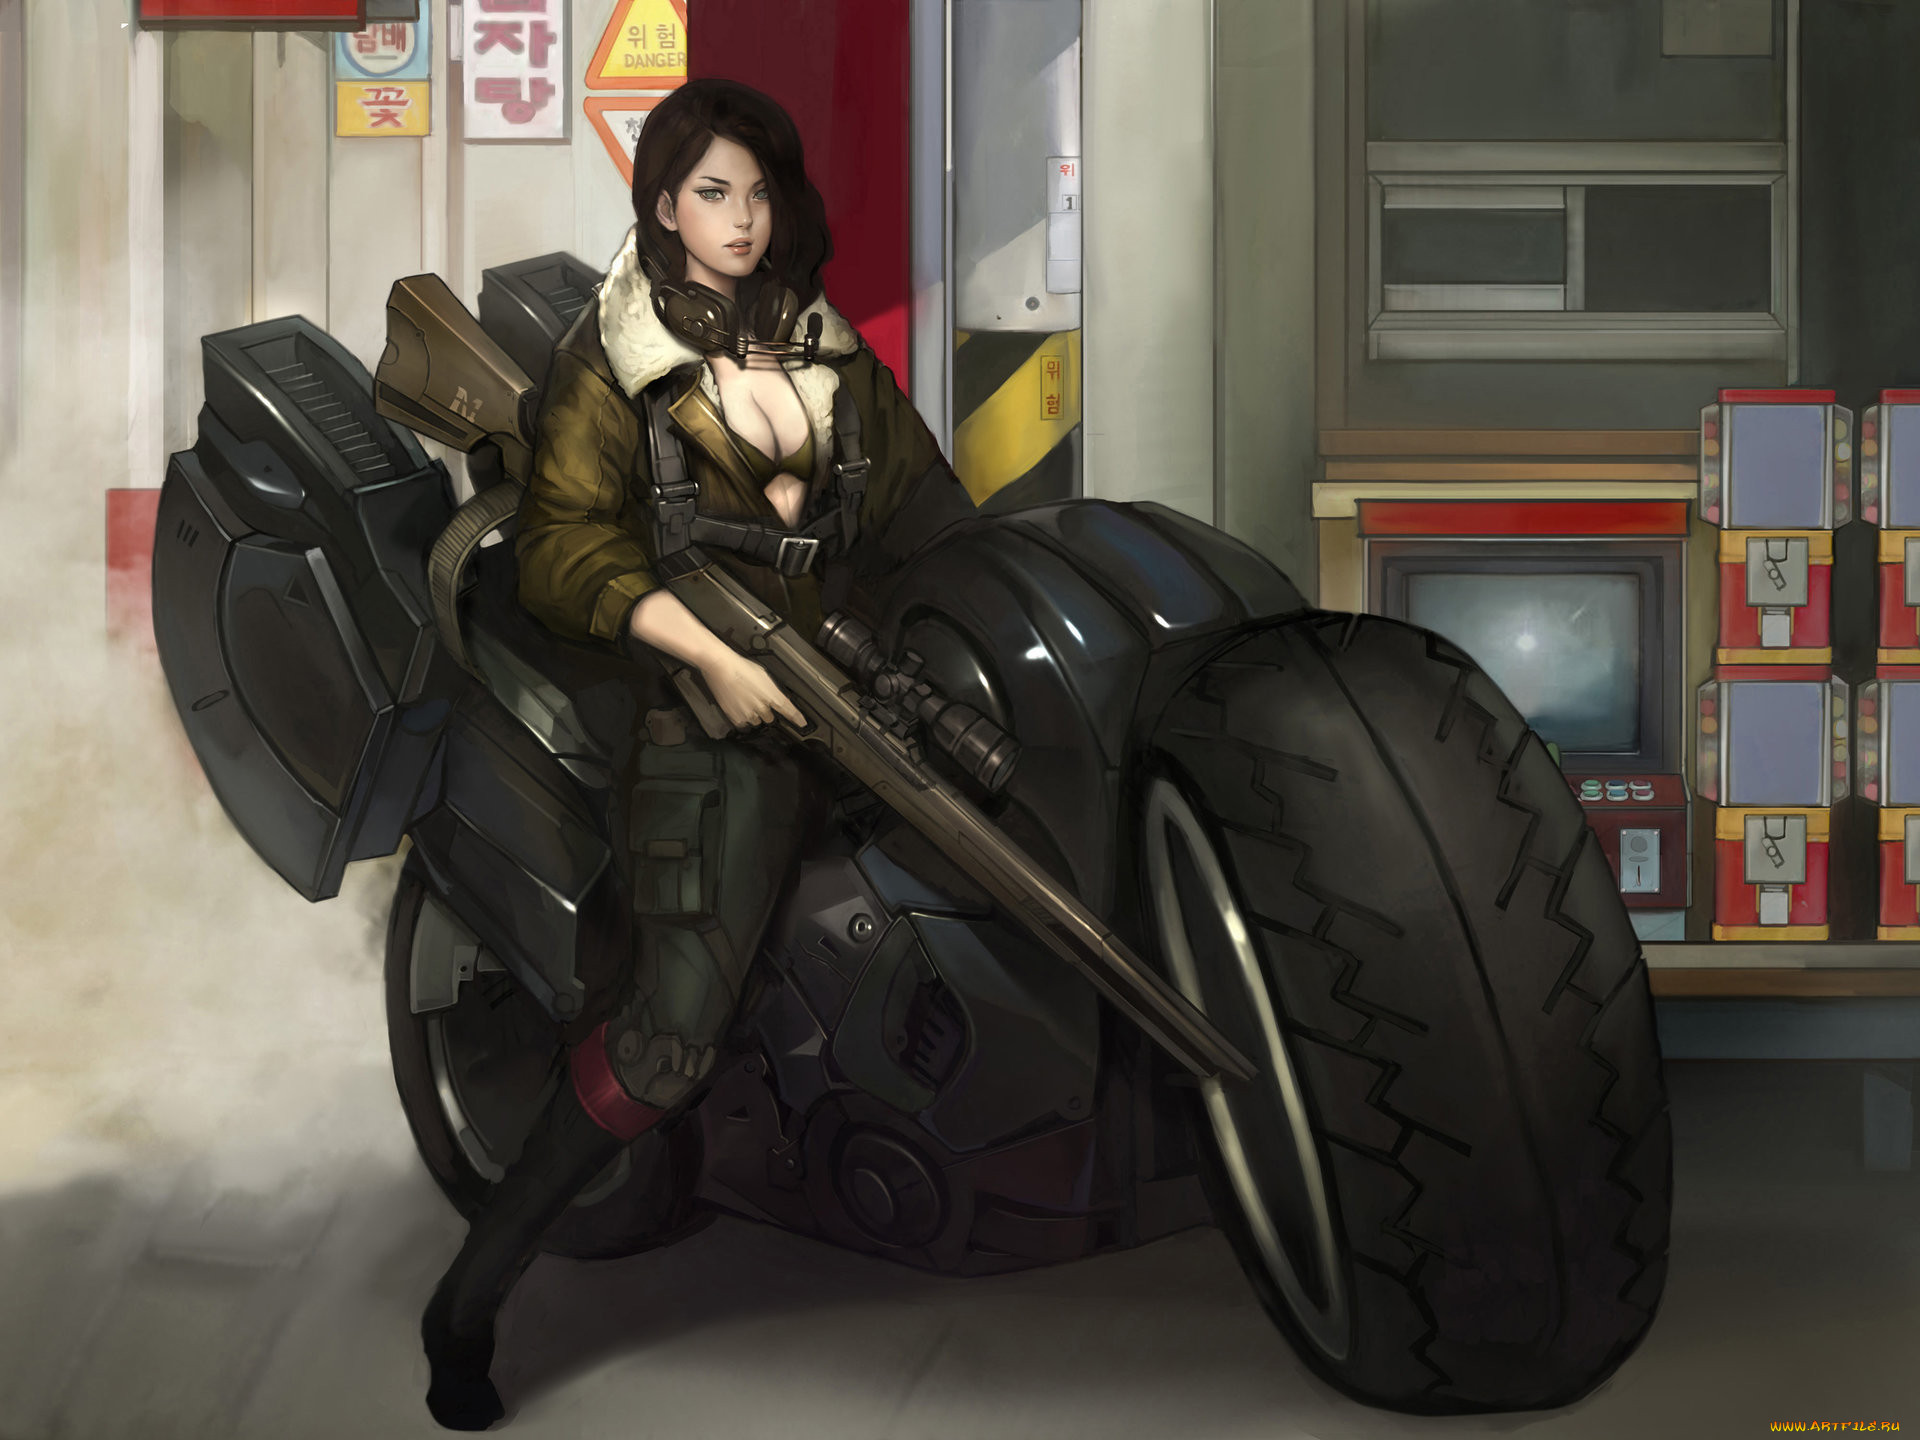 , , , , , sniper, girl, , sci-fi, , by, namgwon, lee, , leather, , jacket, , motorcycle, , headphones, , rifle, cyberpunk, 